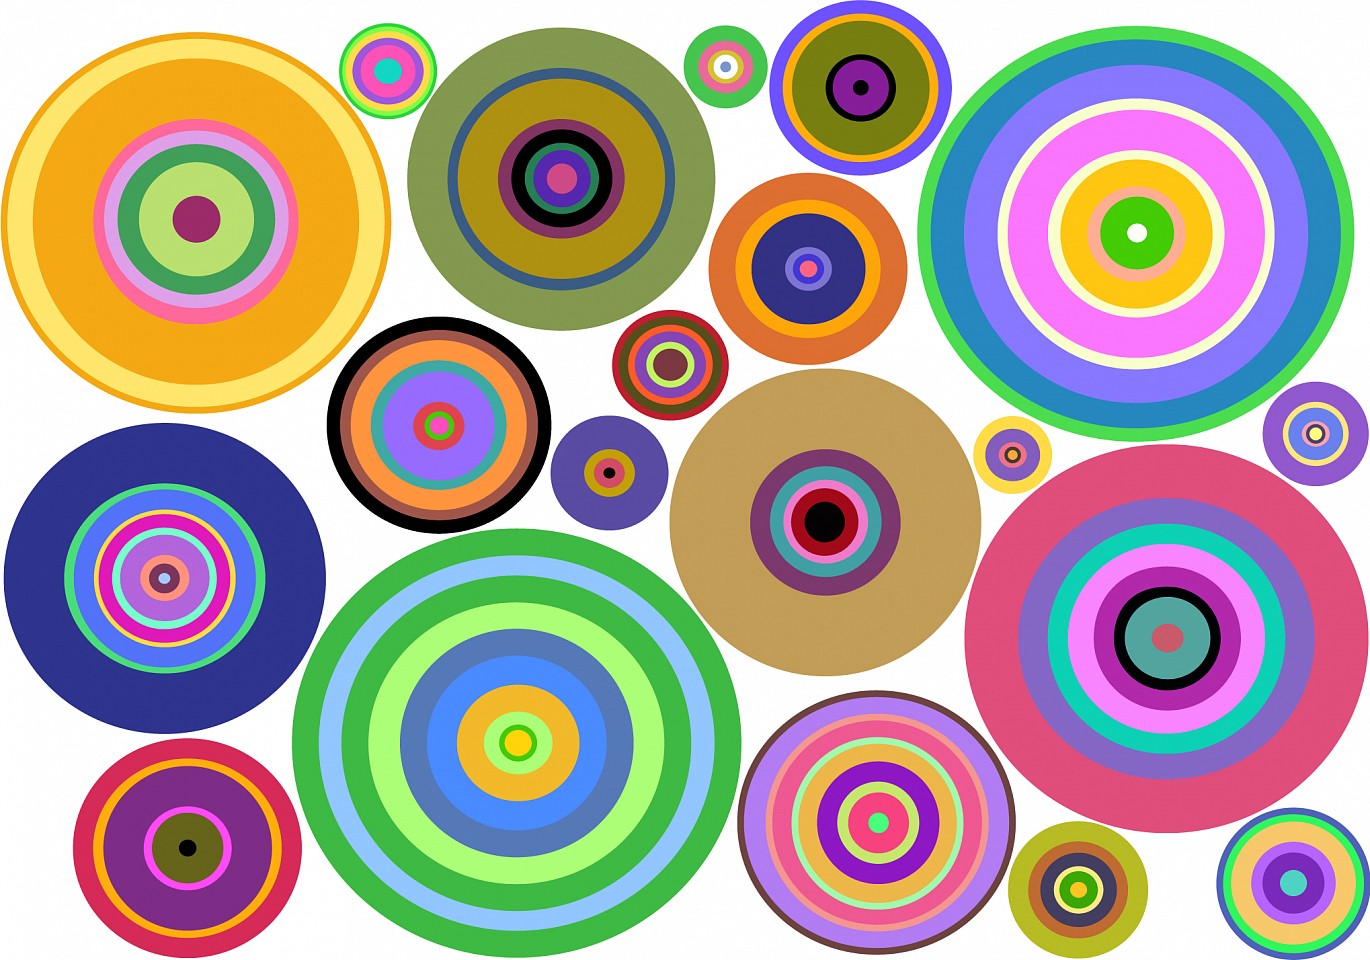 Dane Albert, Circles #24, 2023
Acrylic on canvas (Concept), 48 x 72 in. (121.9 x 182.9 cm)
Series of colored lines and shapes in multiple configurations
DA.2023-024